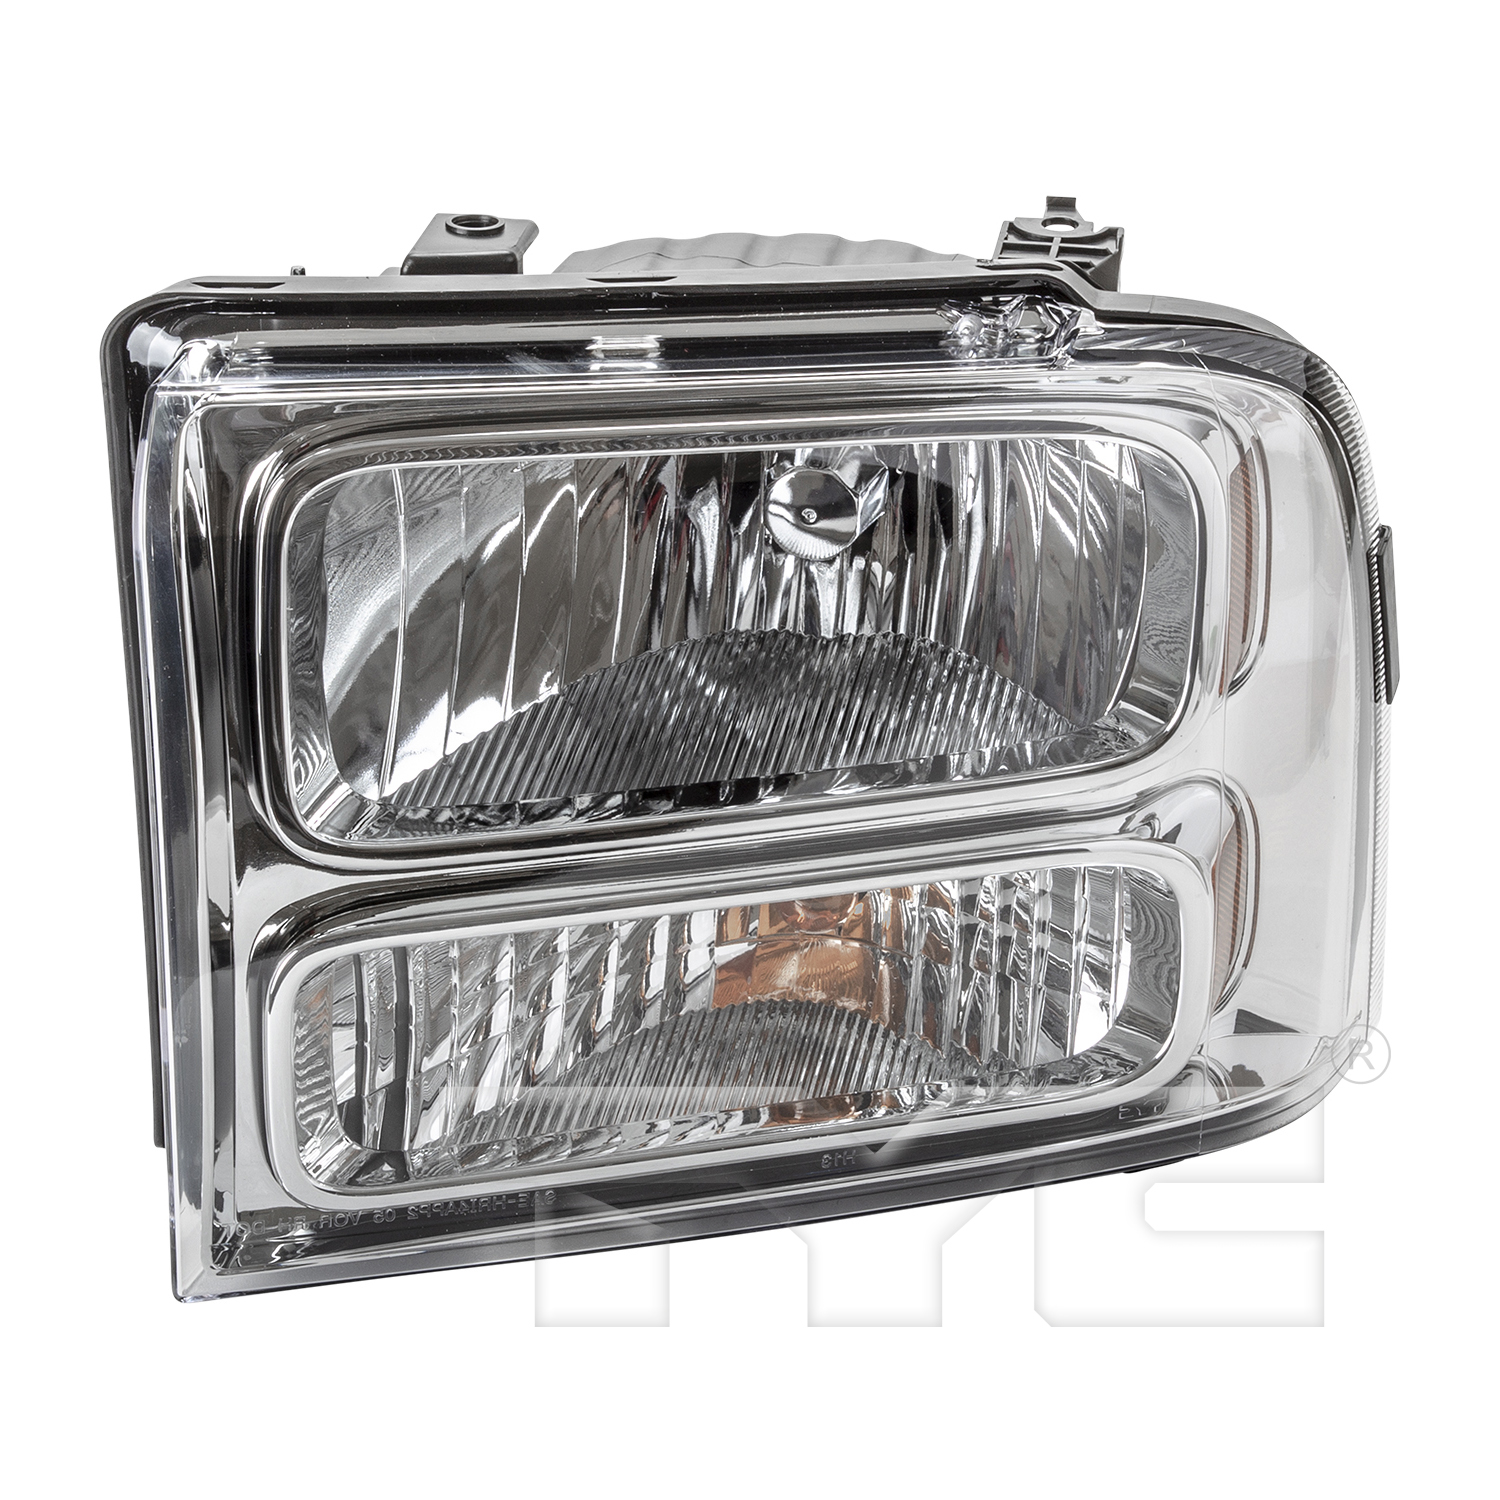 Aftermarket HEADLIGHTS for FORD - F-350 SUPER DUTY, F-350 SUPER DUTY,06-07,LT Headlamp assy composite